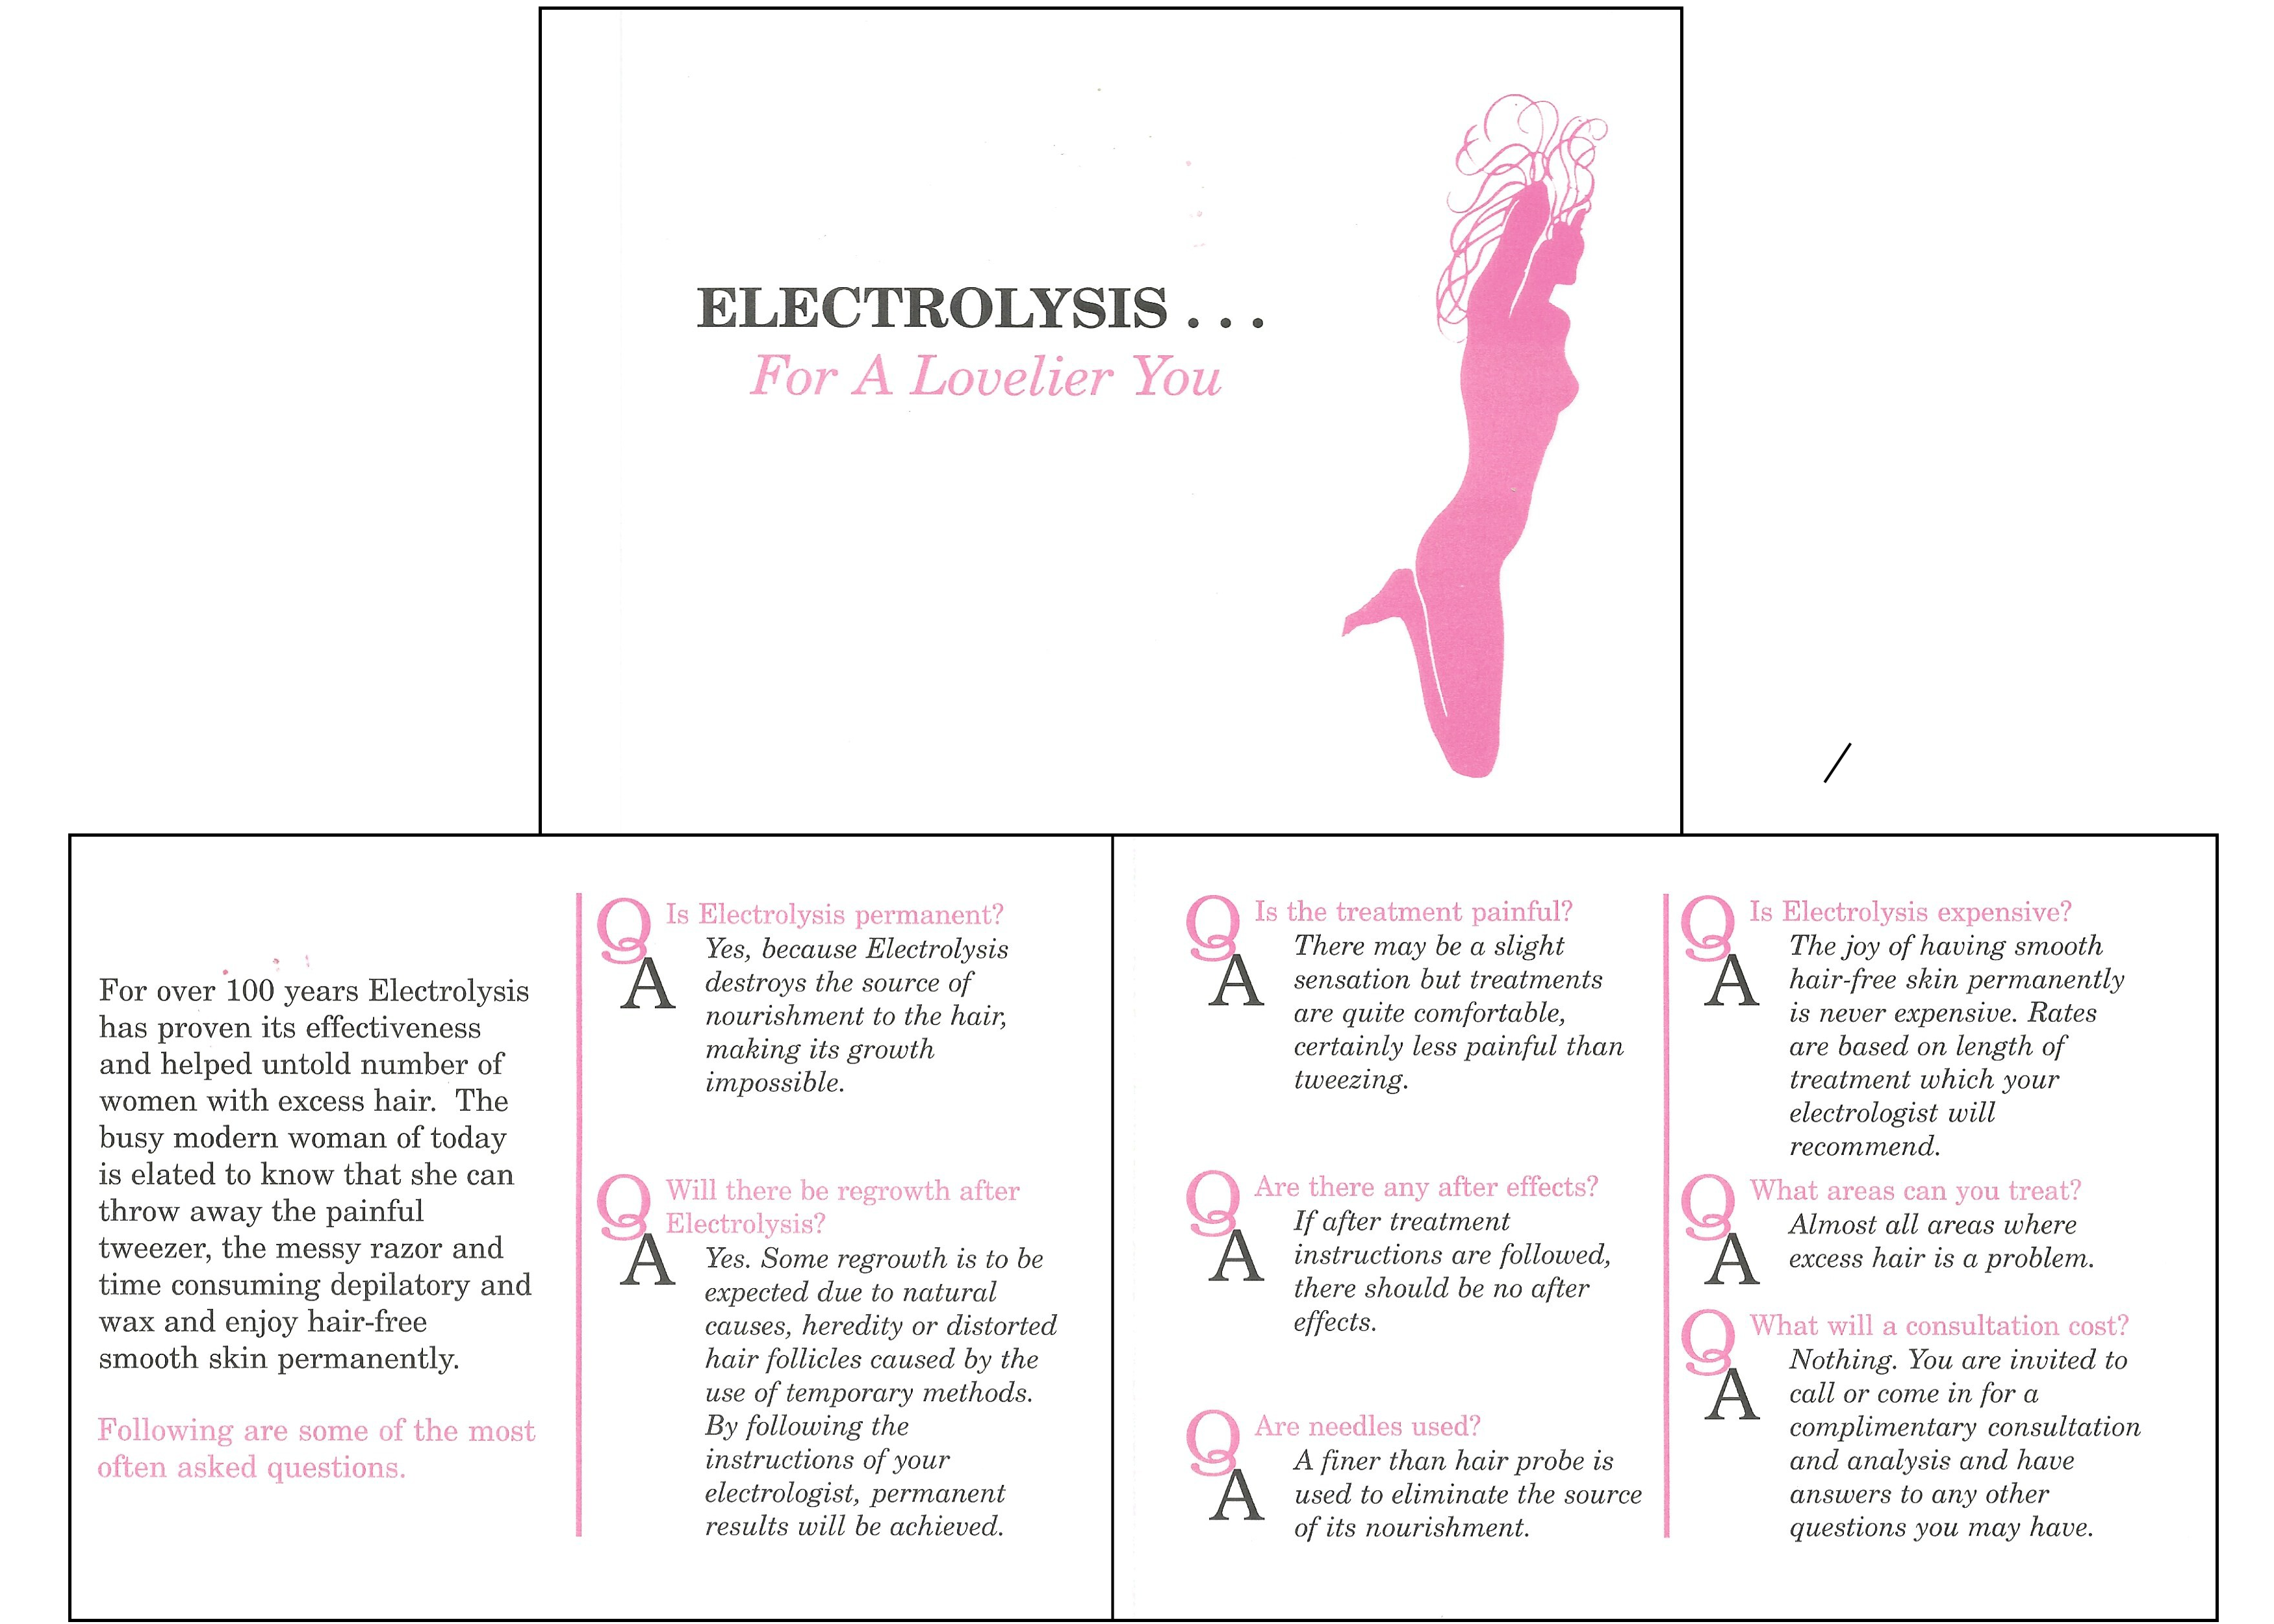 "Electrolysis For A Lovelier You" Brochure